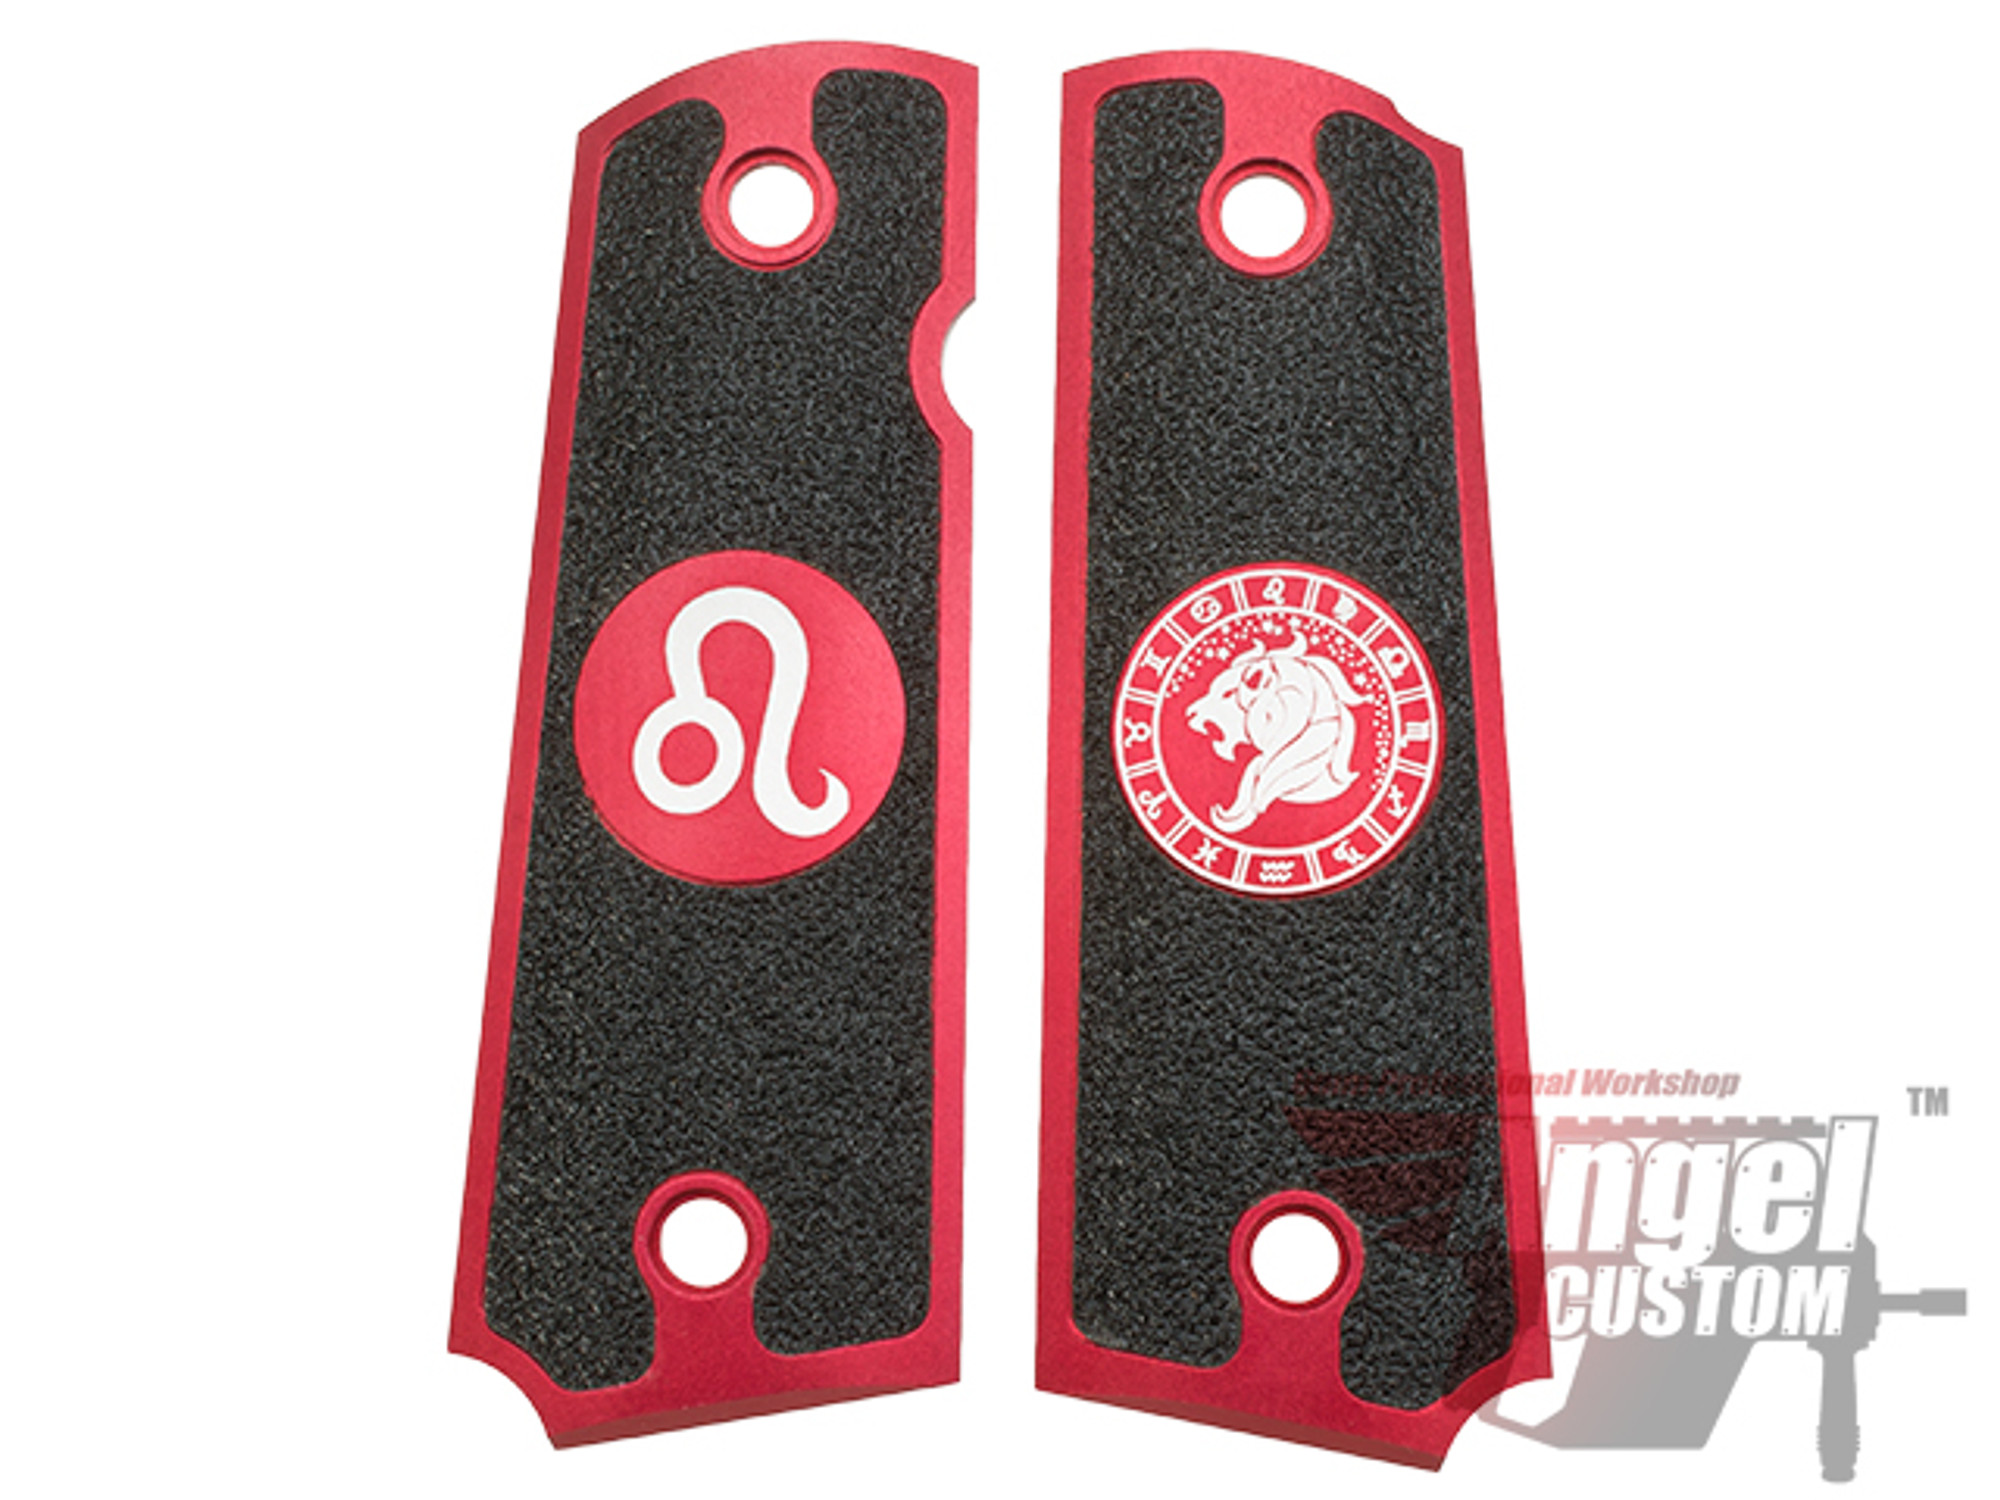 Angel Custom CNC Machined Tac-Glove "Zodiac" Grips for Tokyo Marui/KWA/Western Arms 1911 Series Airsoft Pistols - Leo (Red)